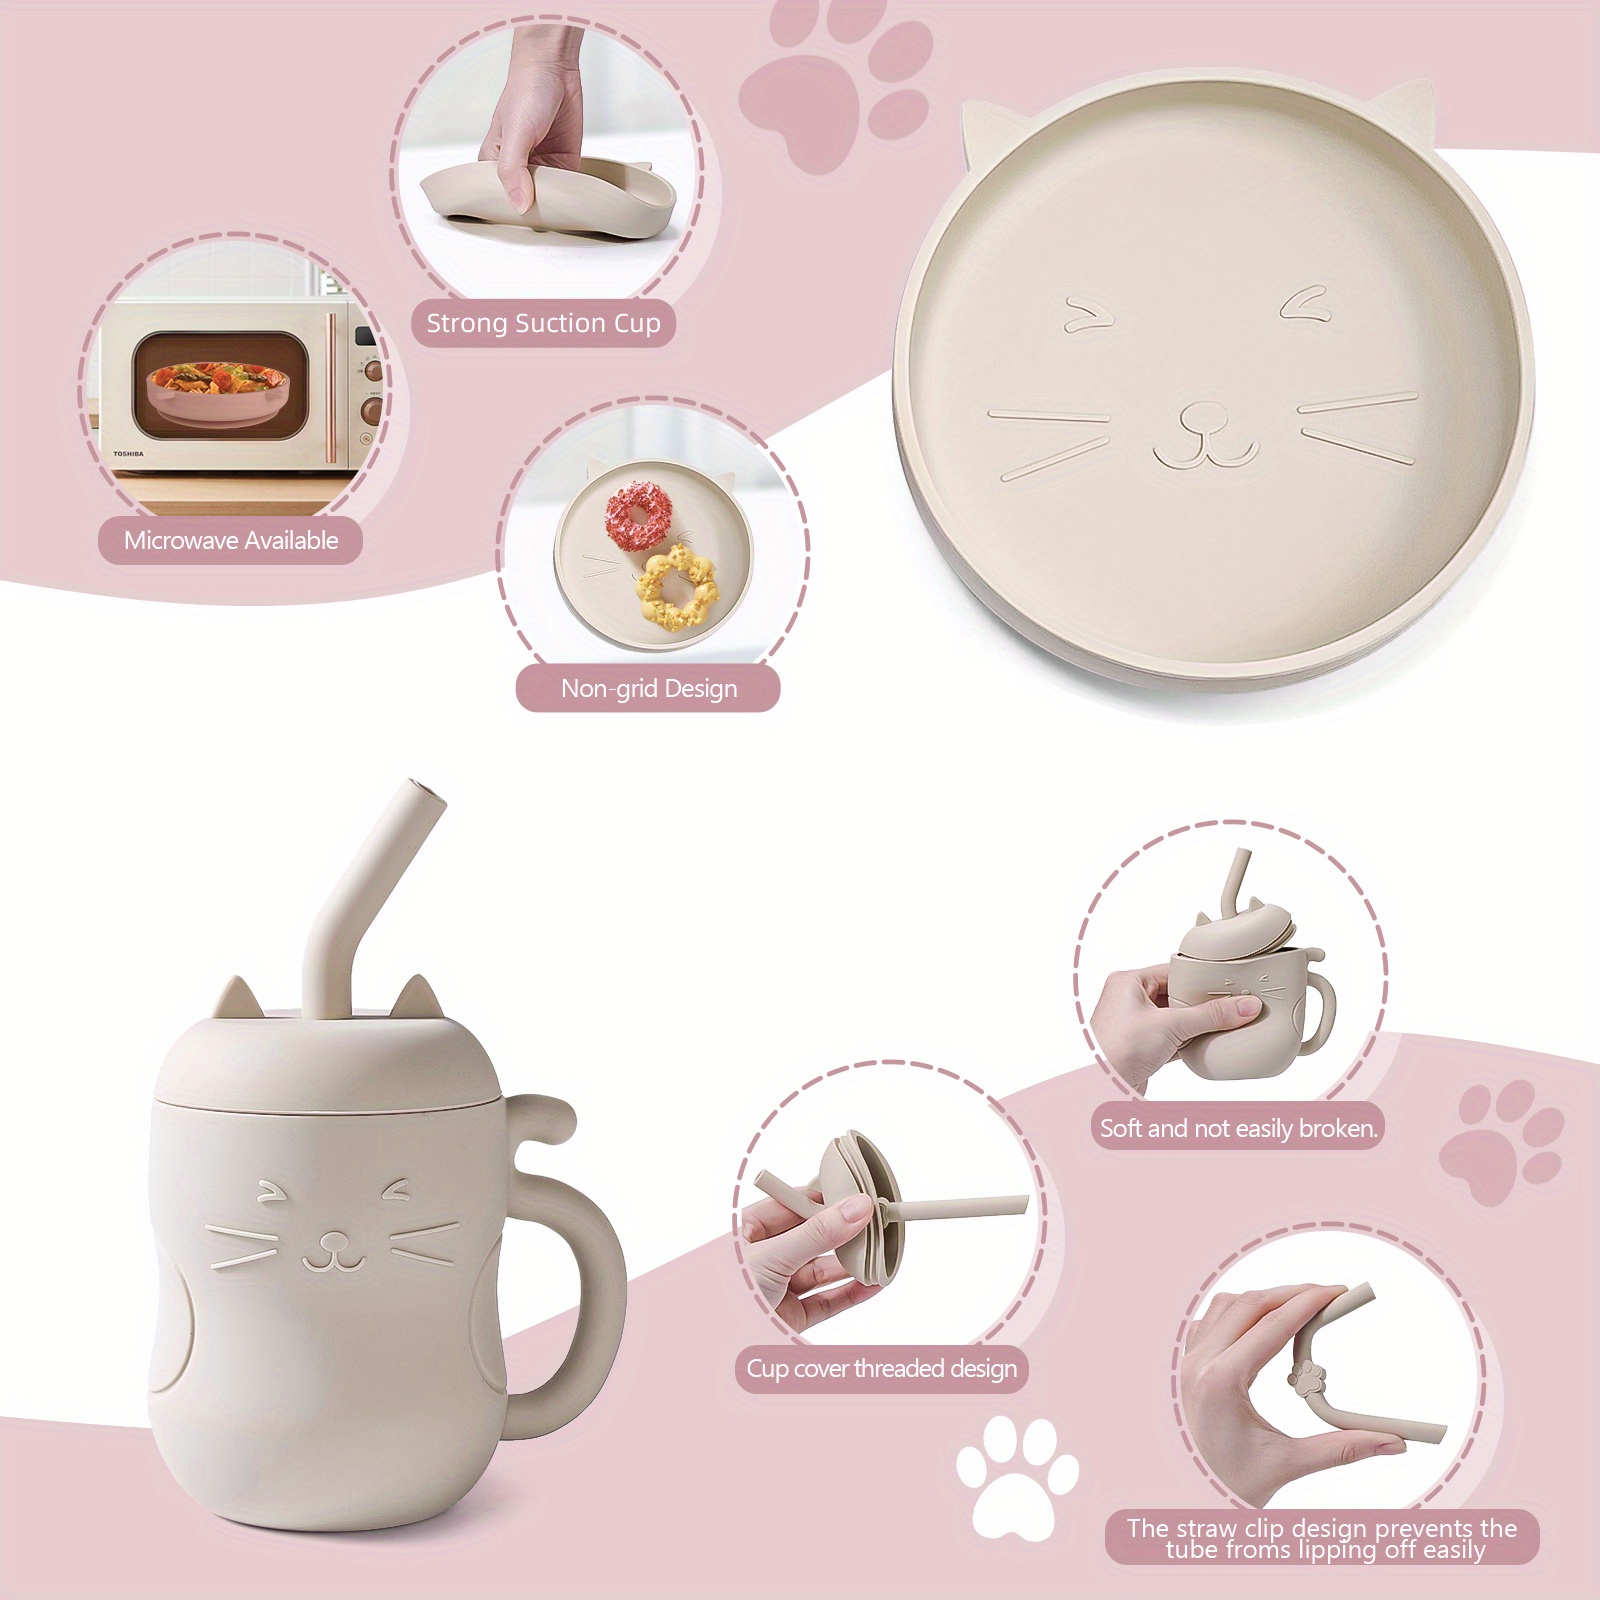 Baby Feeding Set Silicone Feeding Set Shallow Tray Kitten Design Baby  Silicone Tableware, Toddler Eating Utensils, With Suction Cup, Shallow Tray  Bib Soft Spoon Fork Cup, Tough Tableware Set, Edible Grade Silicone